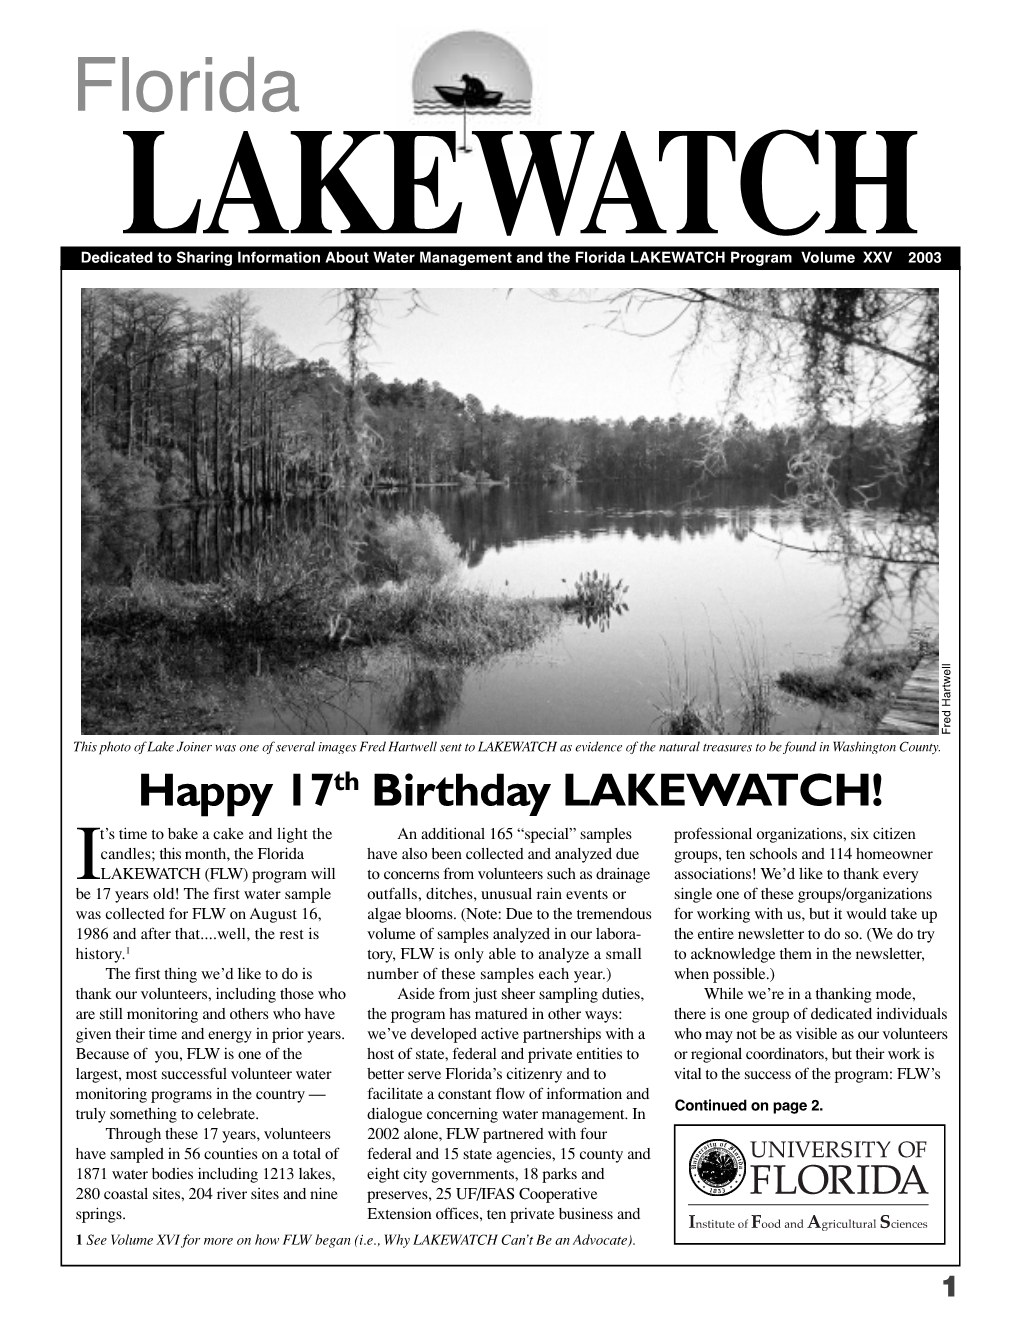 Florida LAKEWATCH Dedicated to Sharing Information About Water Management and the Florida LAKEWATCH Program Volume XXV 2003